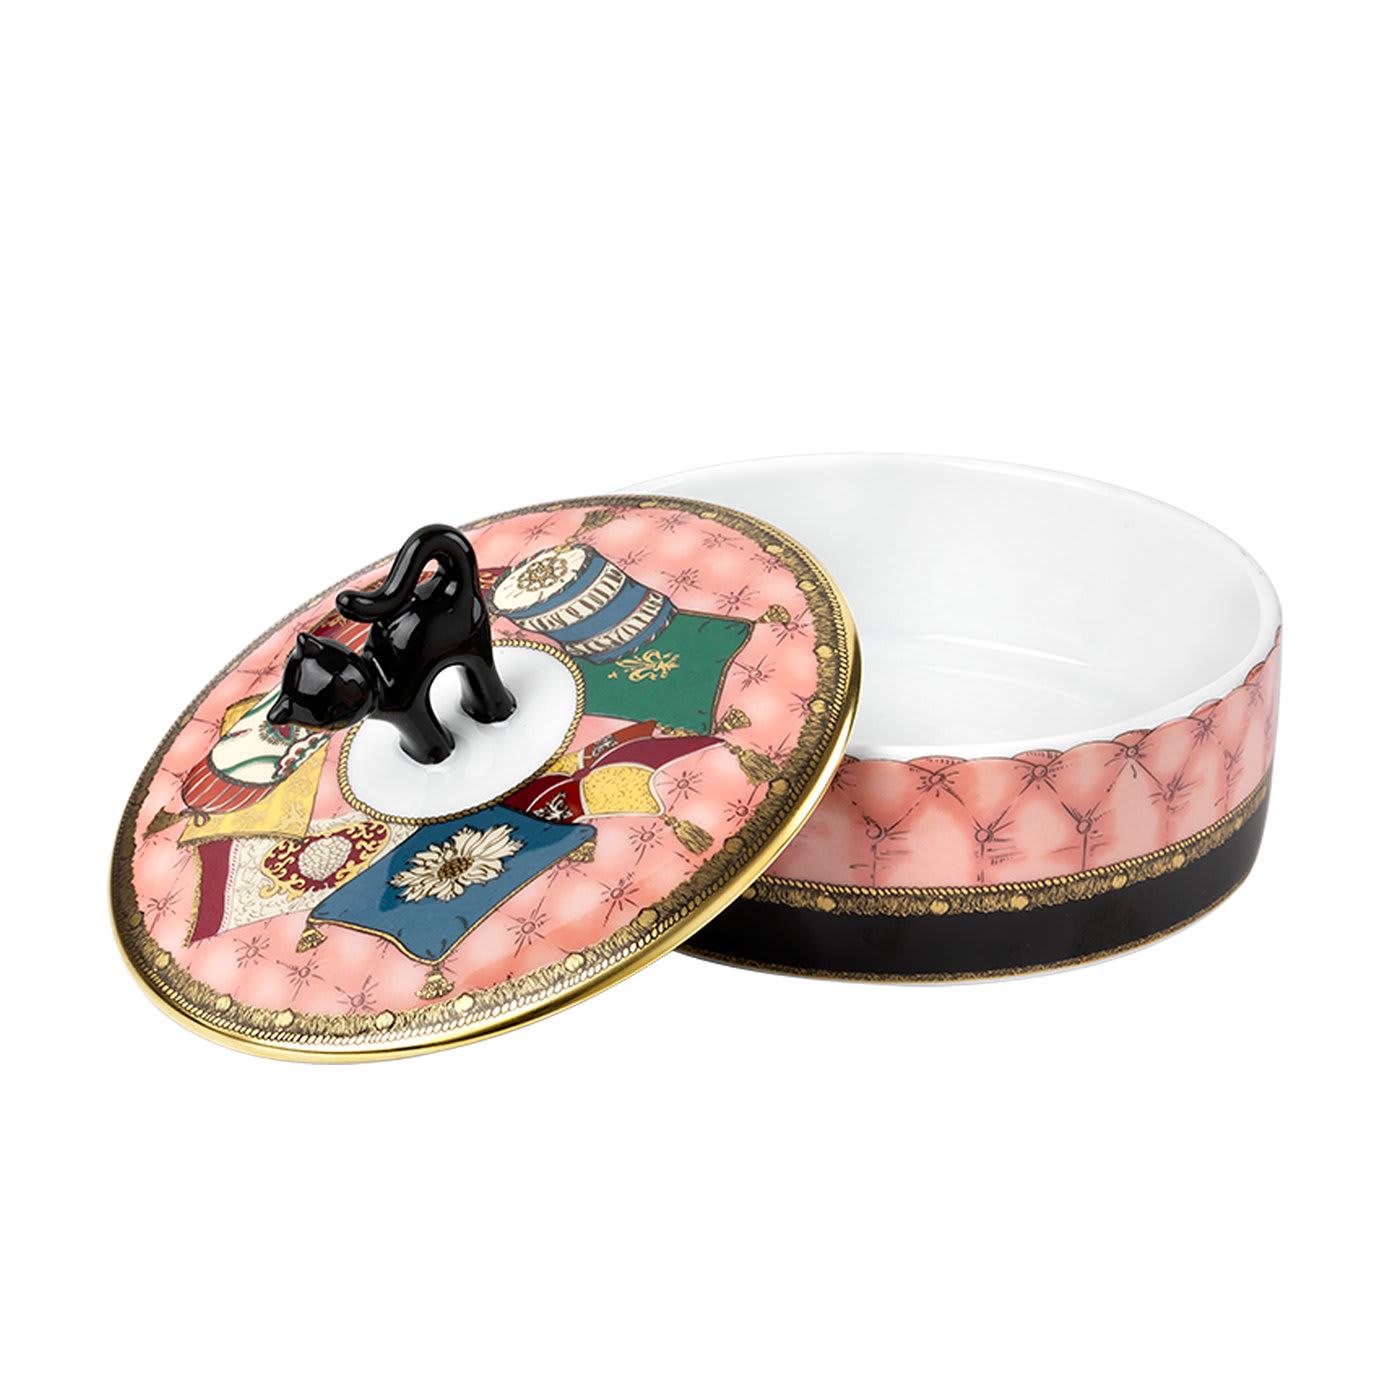 A gem of fine porcelain inspired by the symbolic, animal-dedicated decorations gracing nobles' cups in the 18th century, this round box from the Totem Collection praises the cat's archetypal independence and intelligence. The black, zoomorphic